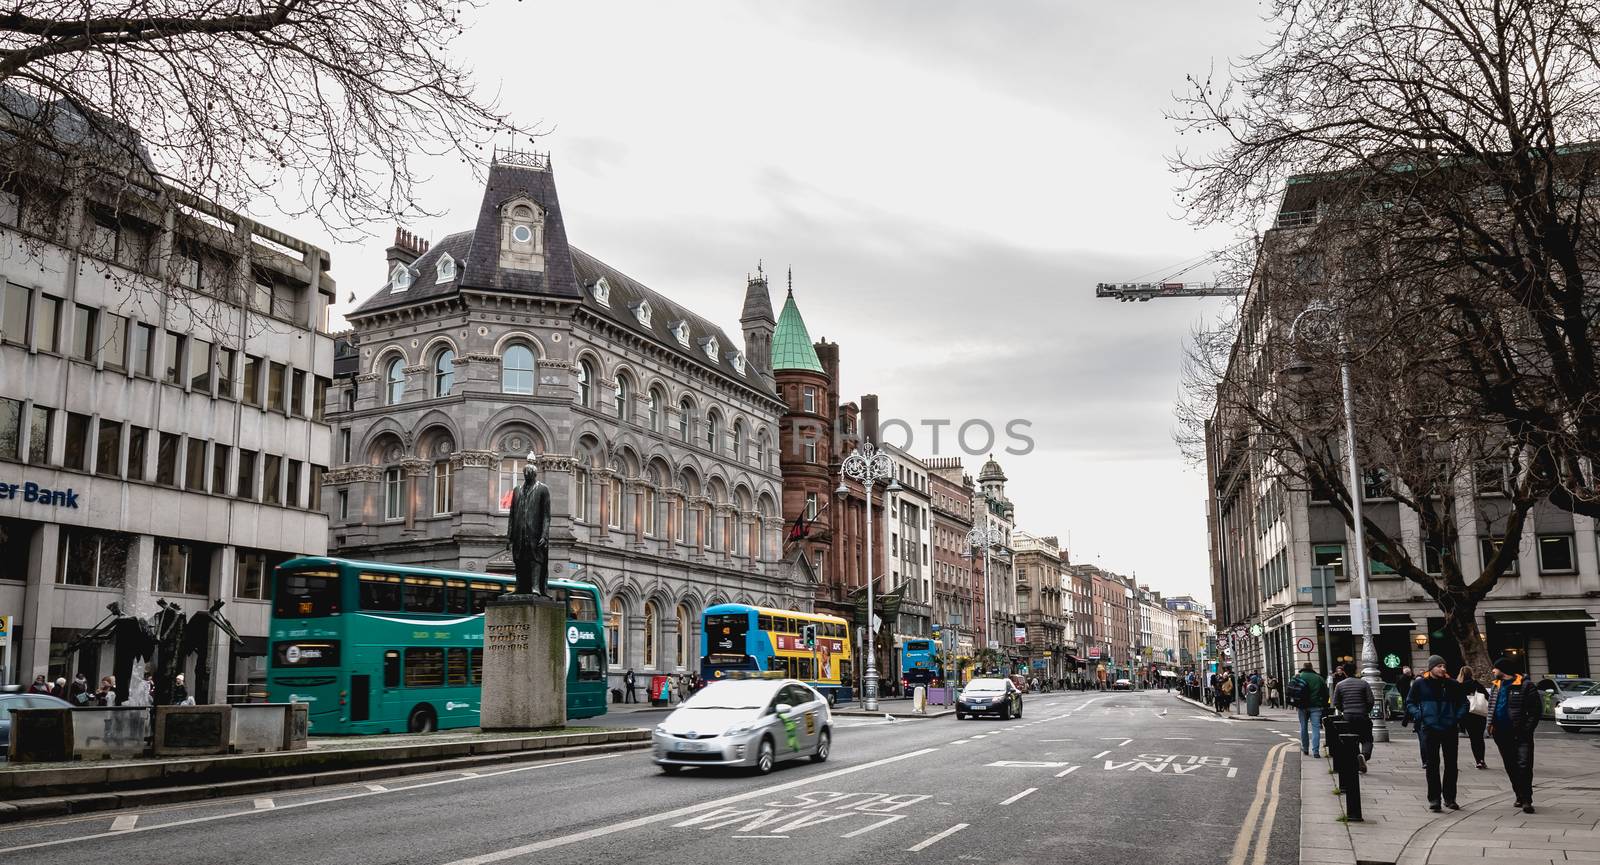 Dublin, Ireland - February 11, 2019: People walking down a shopping street with typical Irish architecture in the historic city center on a winter day